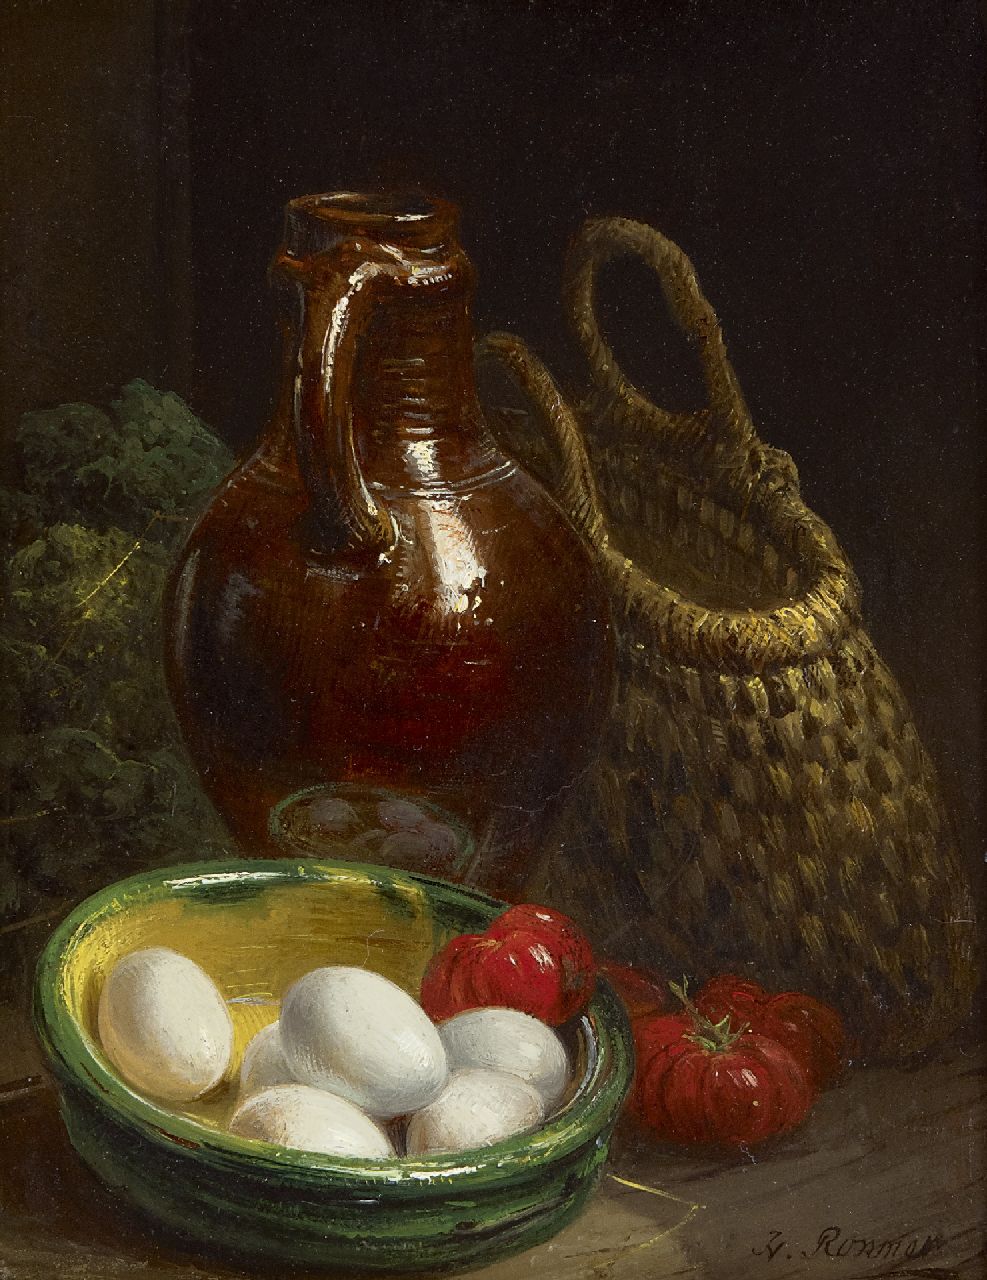 Ronner-Knip H.  | Henriette Ronner-Knip, A still life with eggs and a jug, oil on panel 18.9 x 14.6 cm, signed l.r.